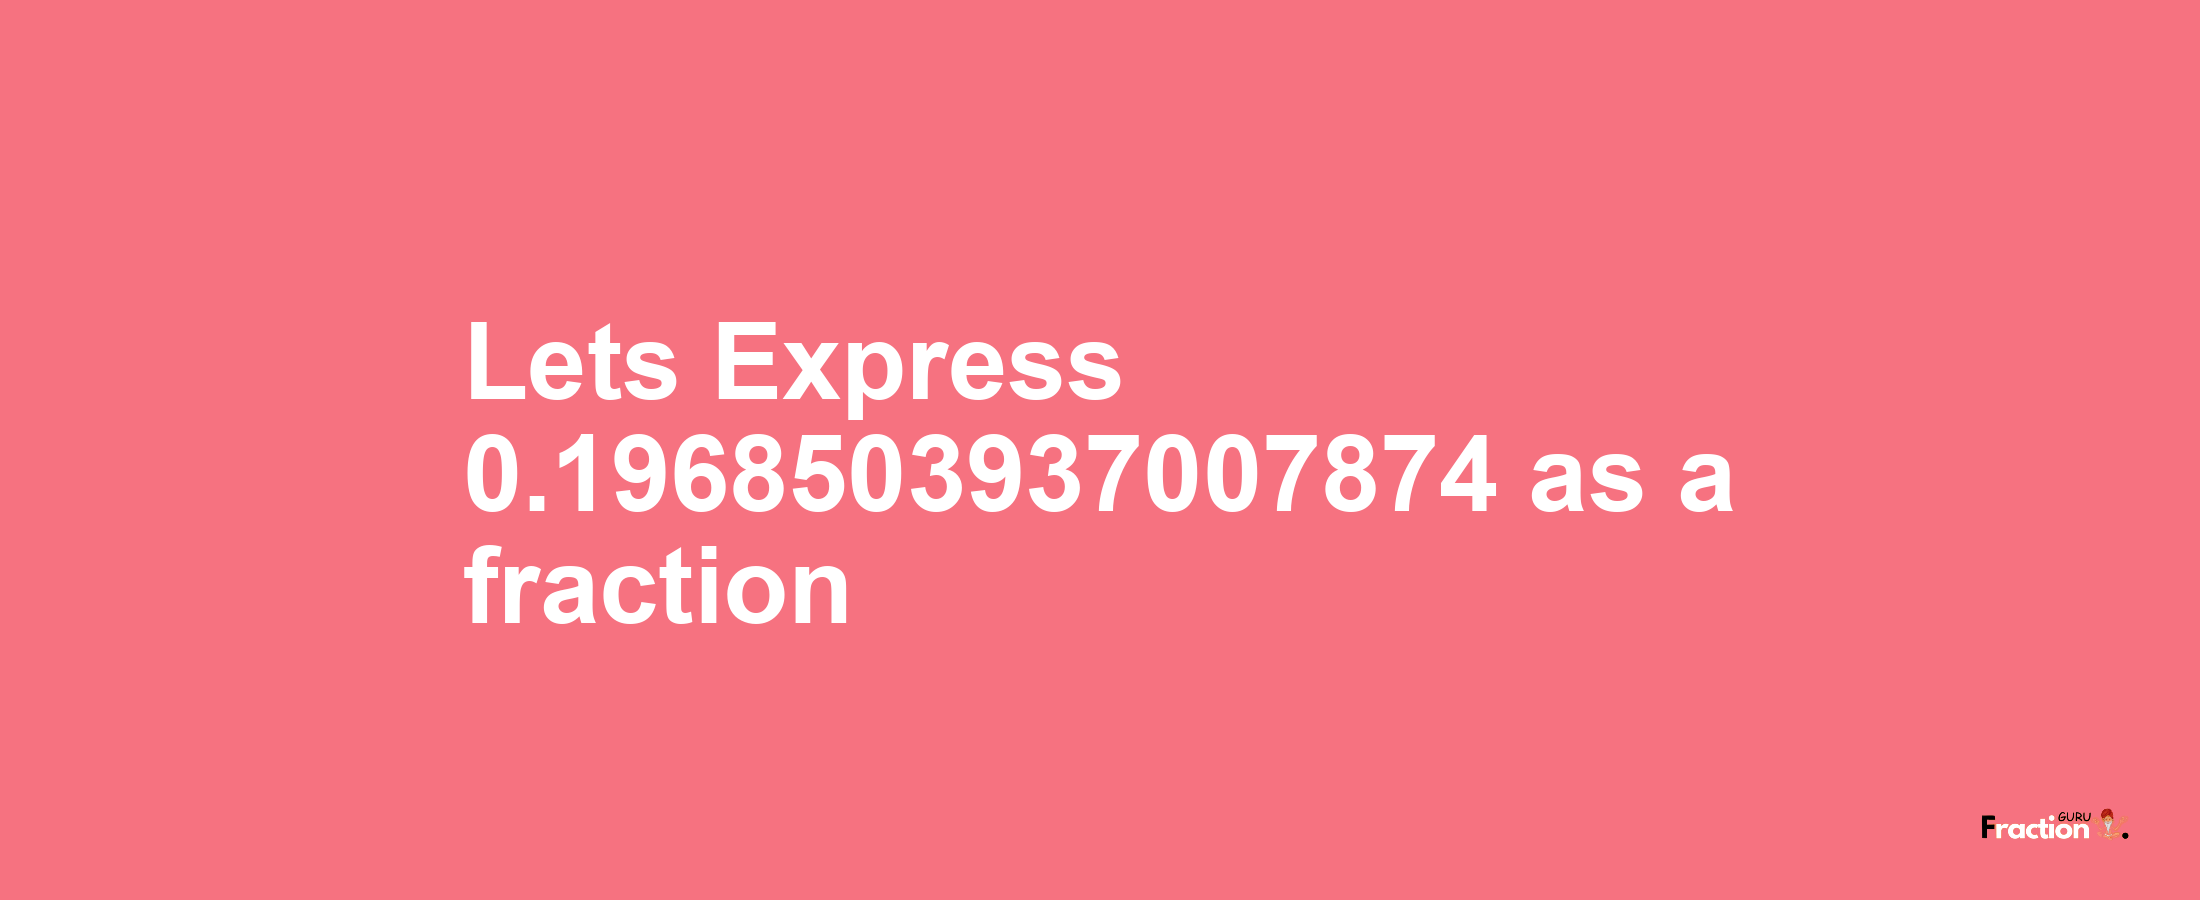 Lets Express 0.1968503937007874 as afraction